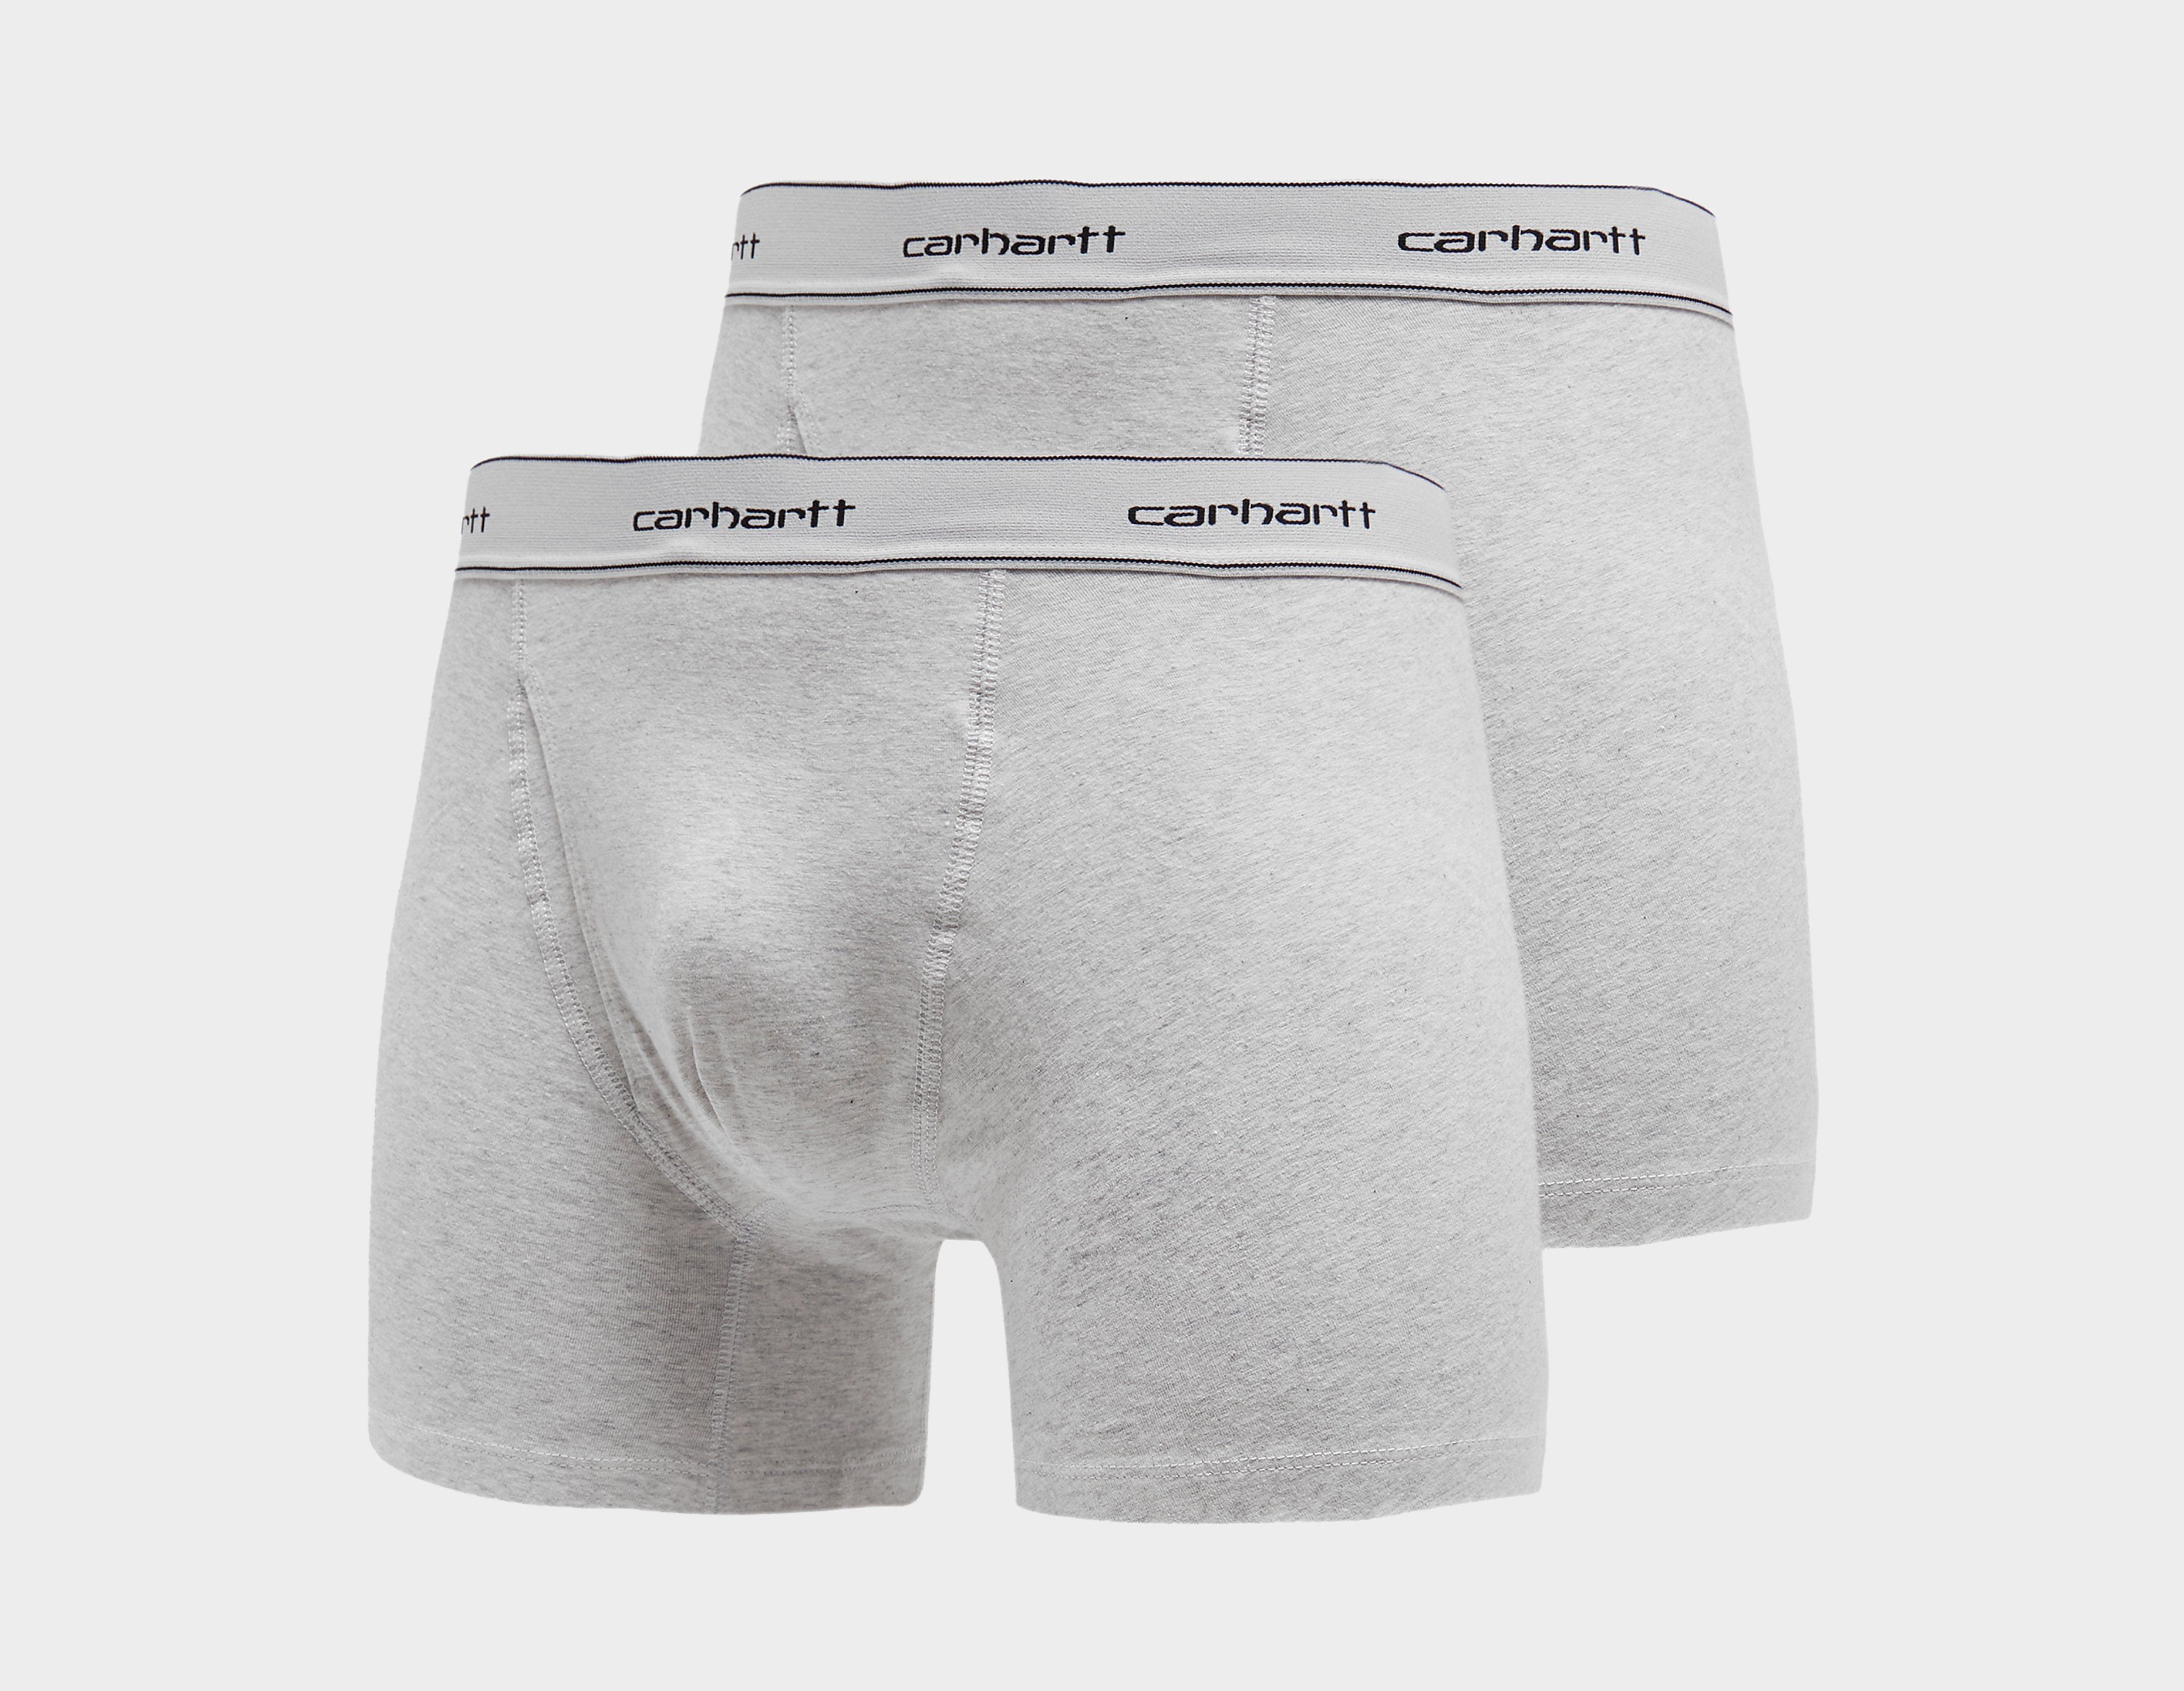 Carhartt Wip Cotton Boxer Trunks 2 Pack, Grey